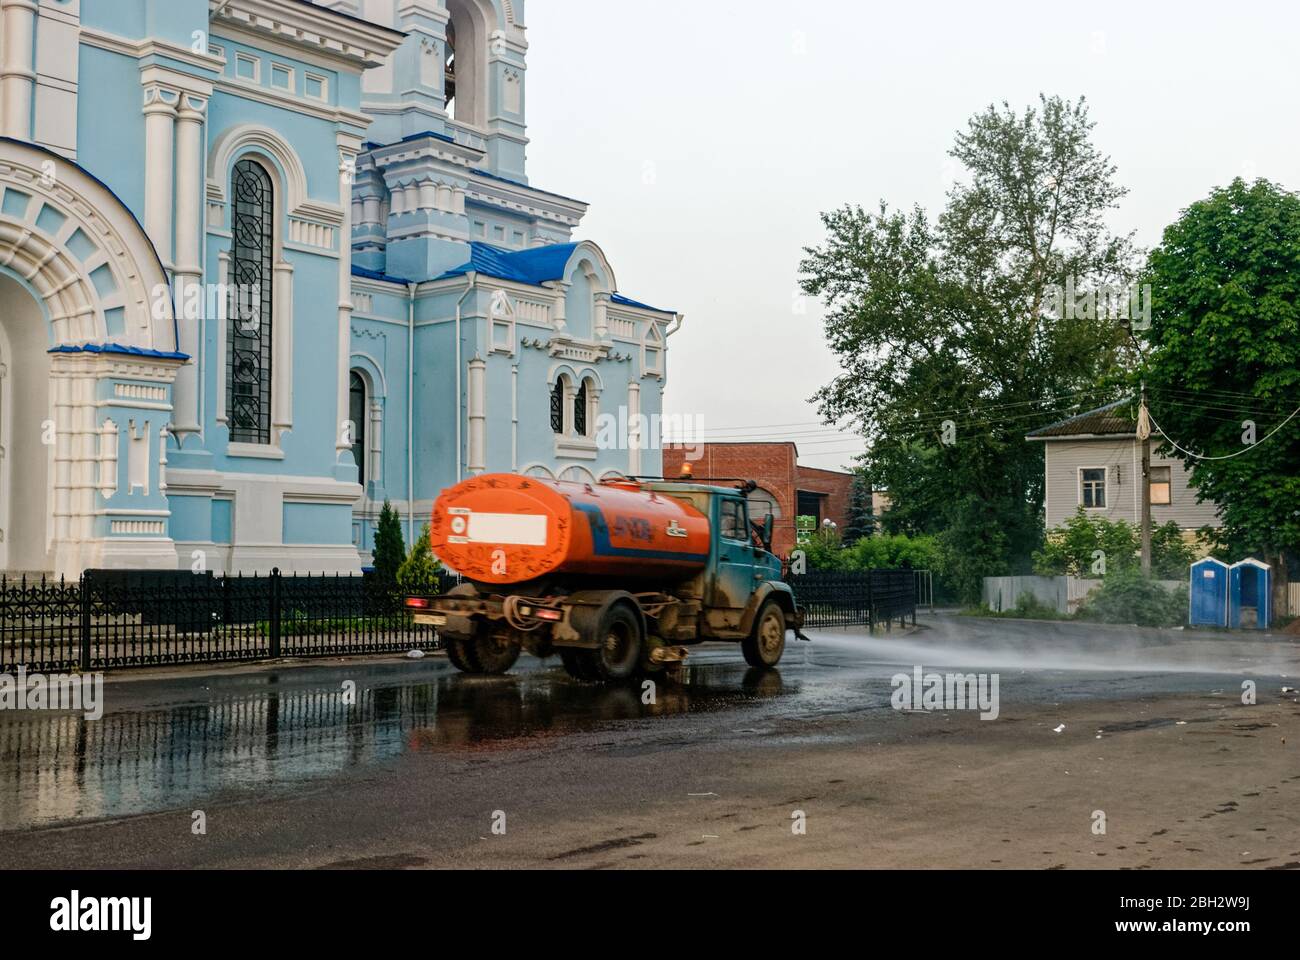 Kaluga Region, the city of Maloyaroslavets, Russia June 25, 2013: Street sprinkler in the early morning on the city street. Washes dirt off the road. Stock Photo